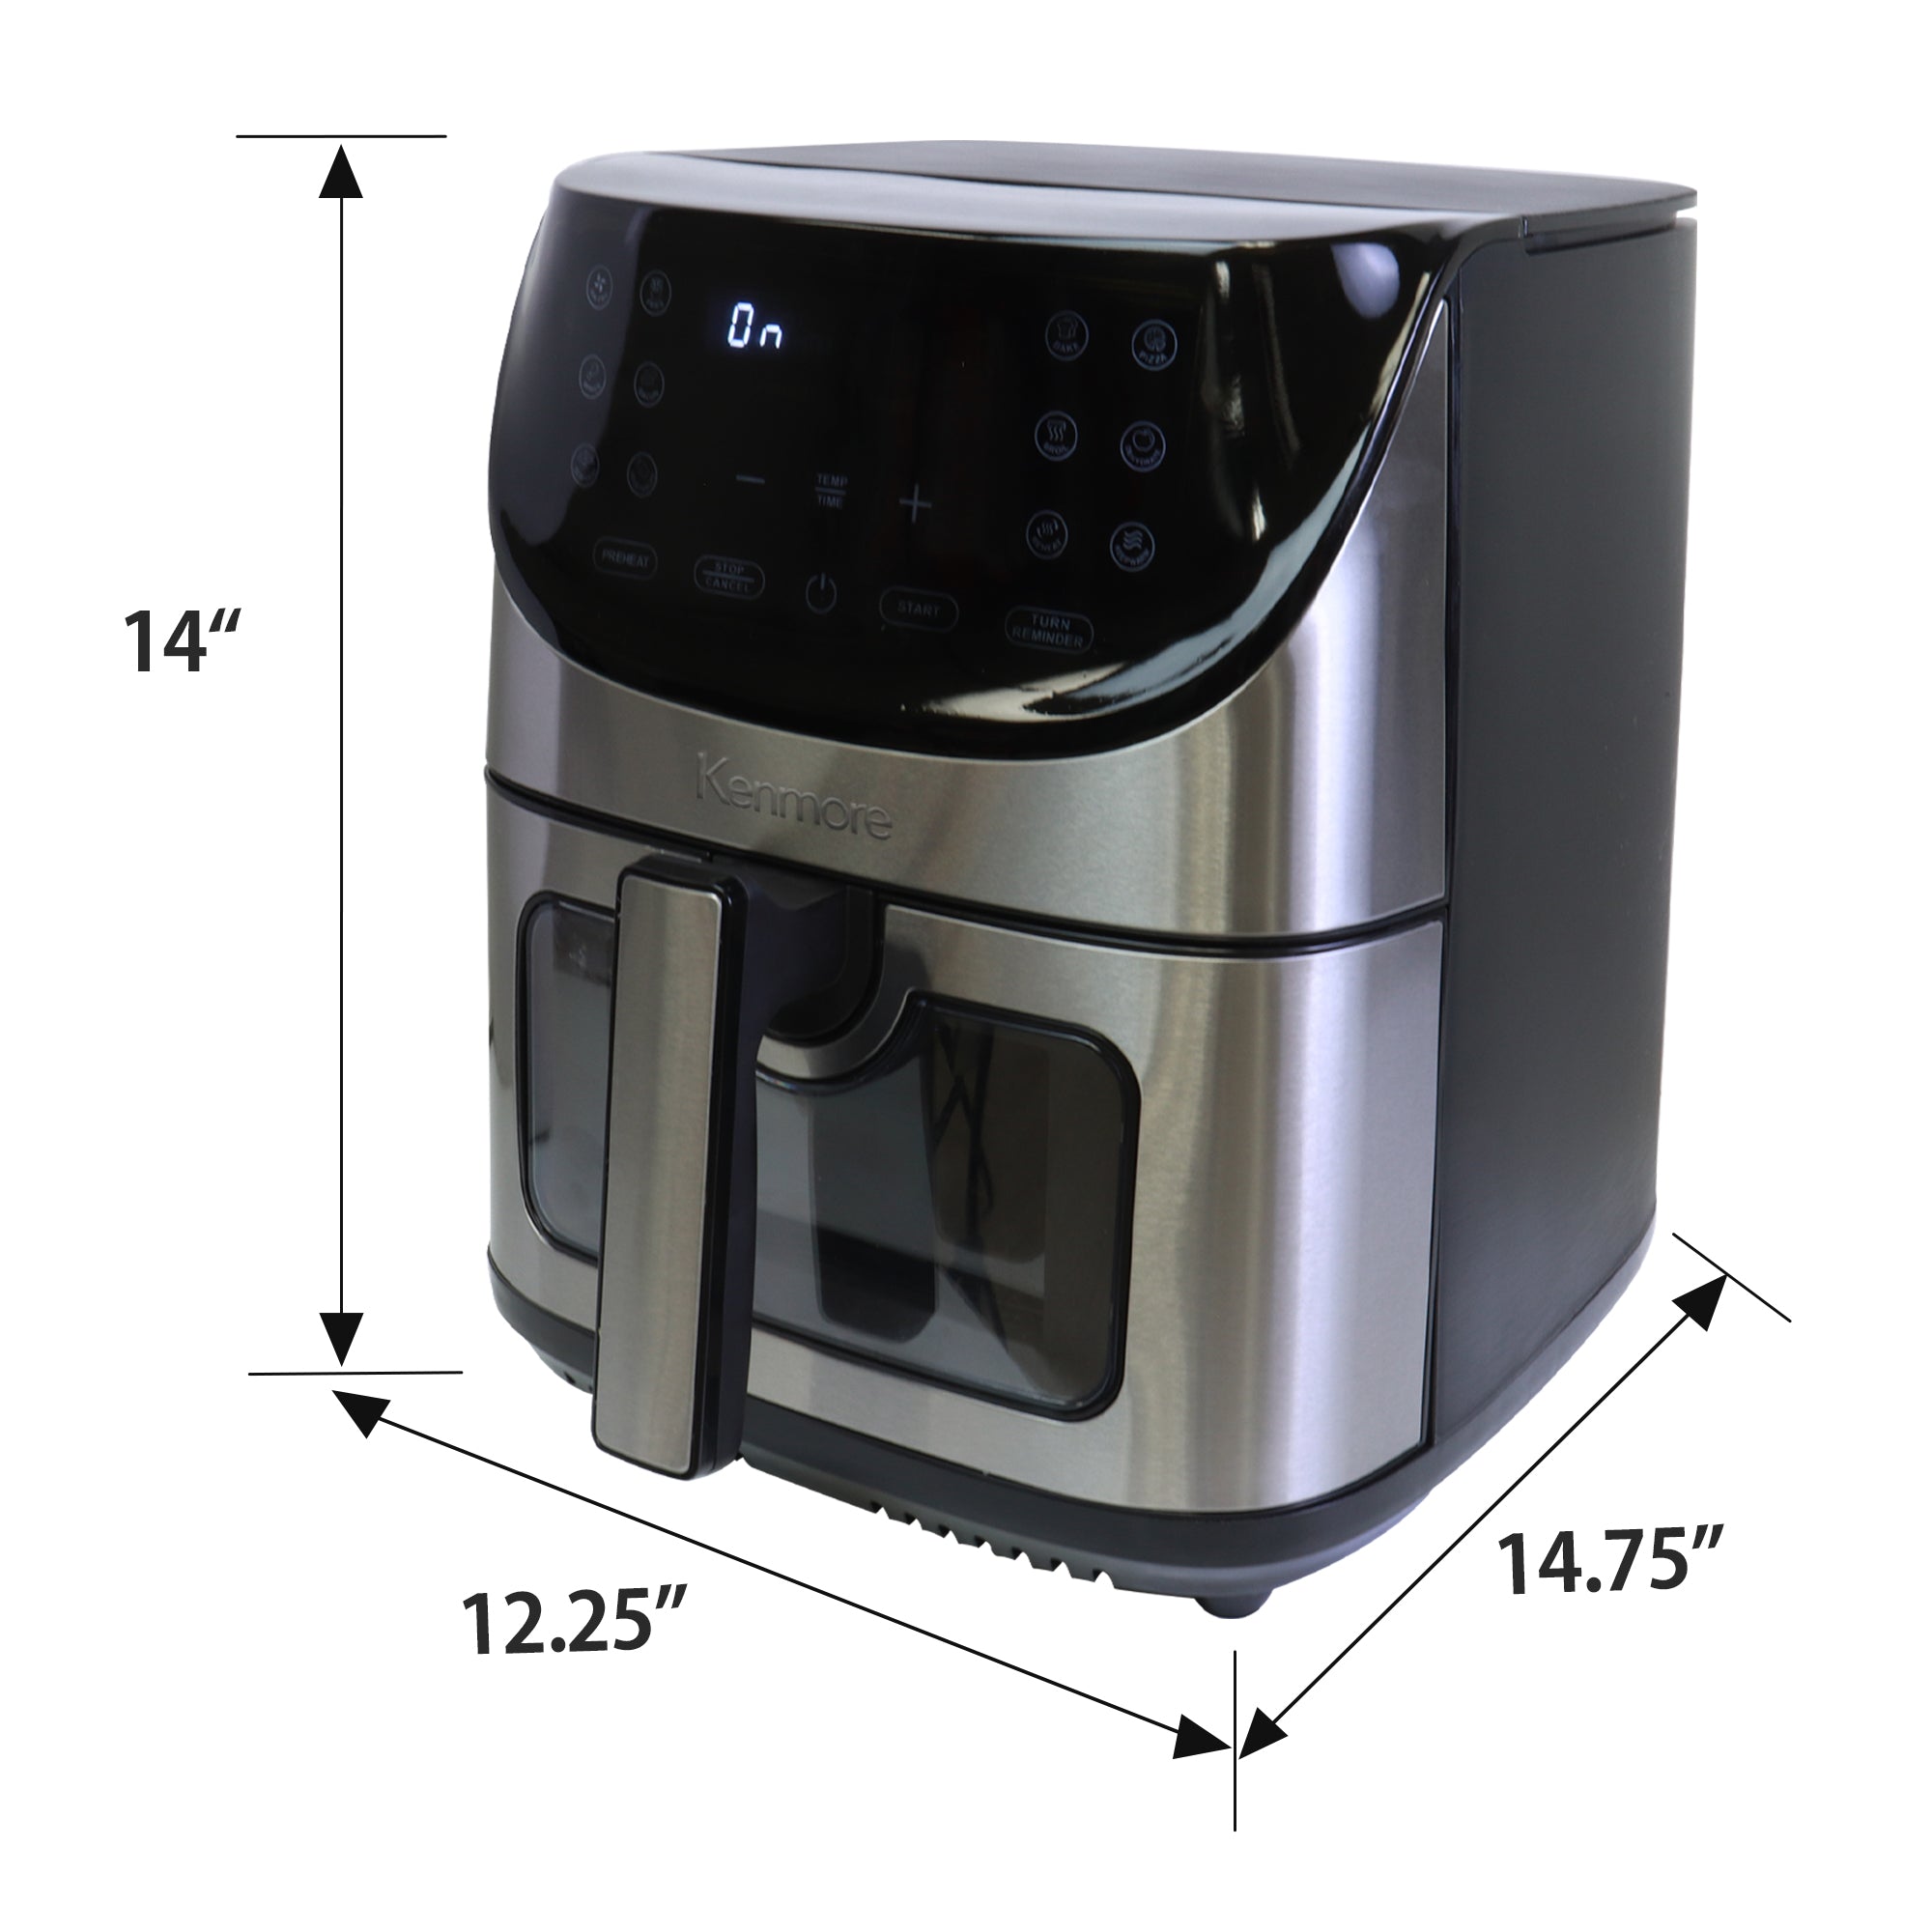 Kenmore stainless steel digital air fryer on a white background with dimensions labeled.